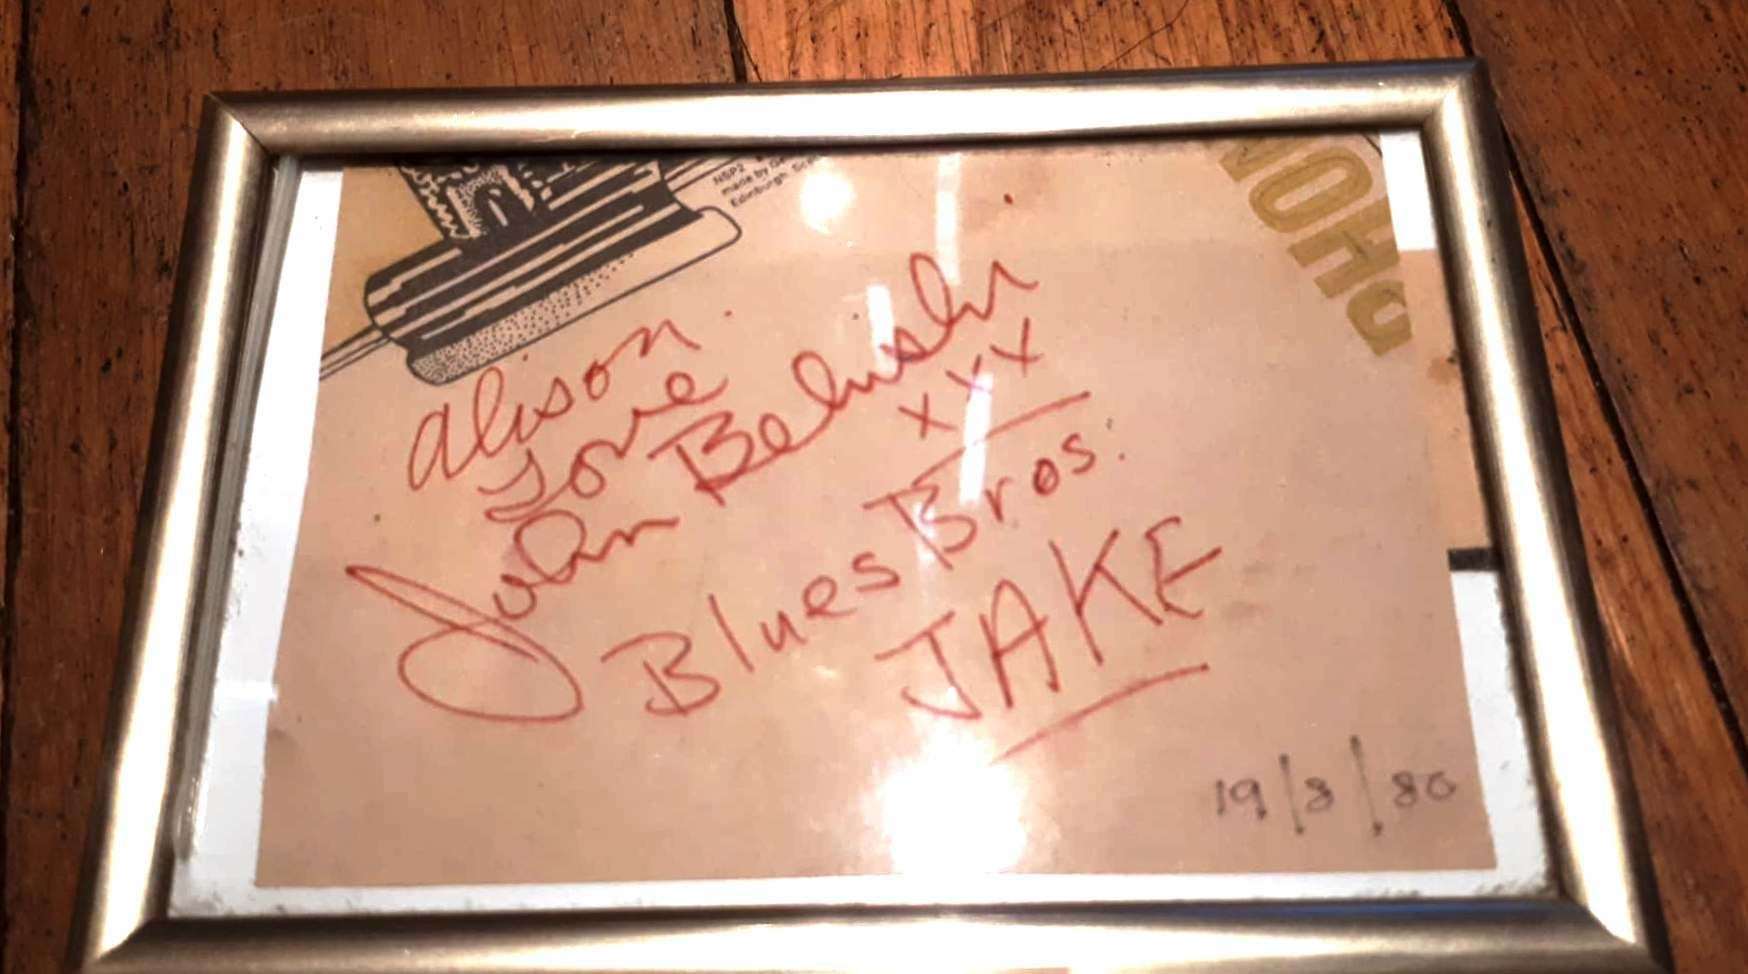 Alison Green received this autograph from Belushi including his on-screen Blues Brothers name "Jake".